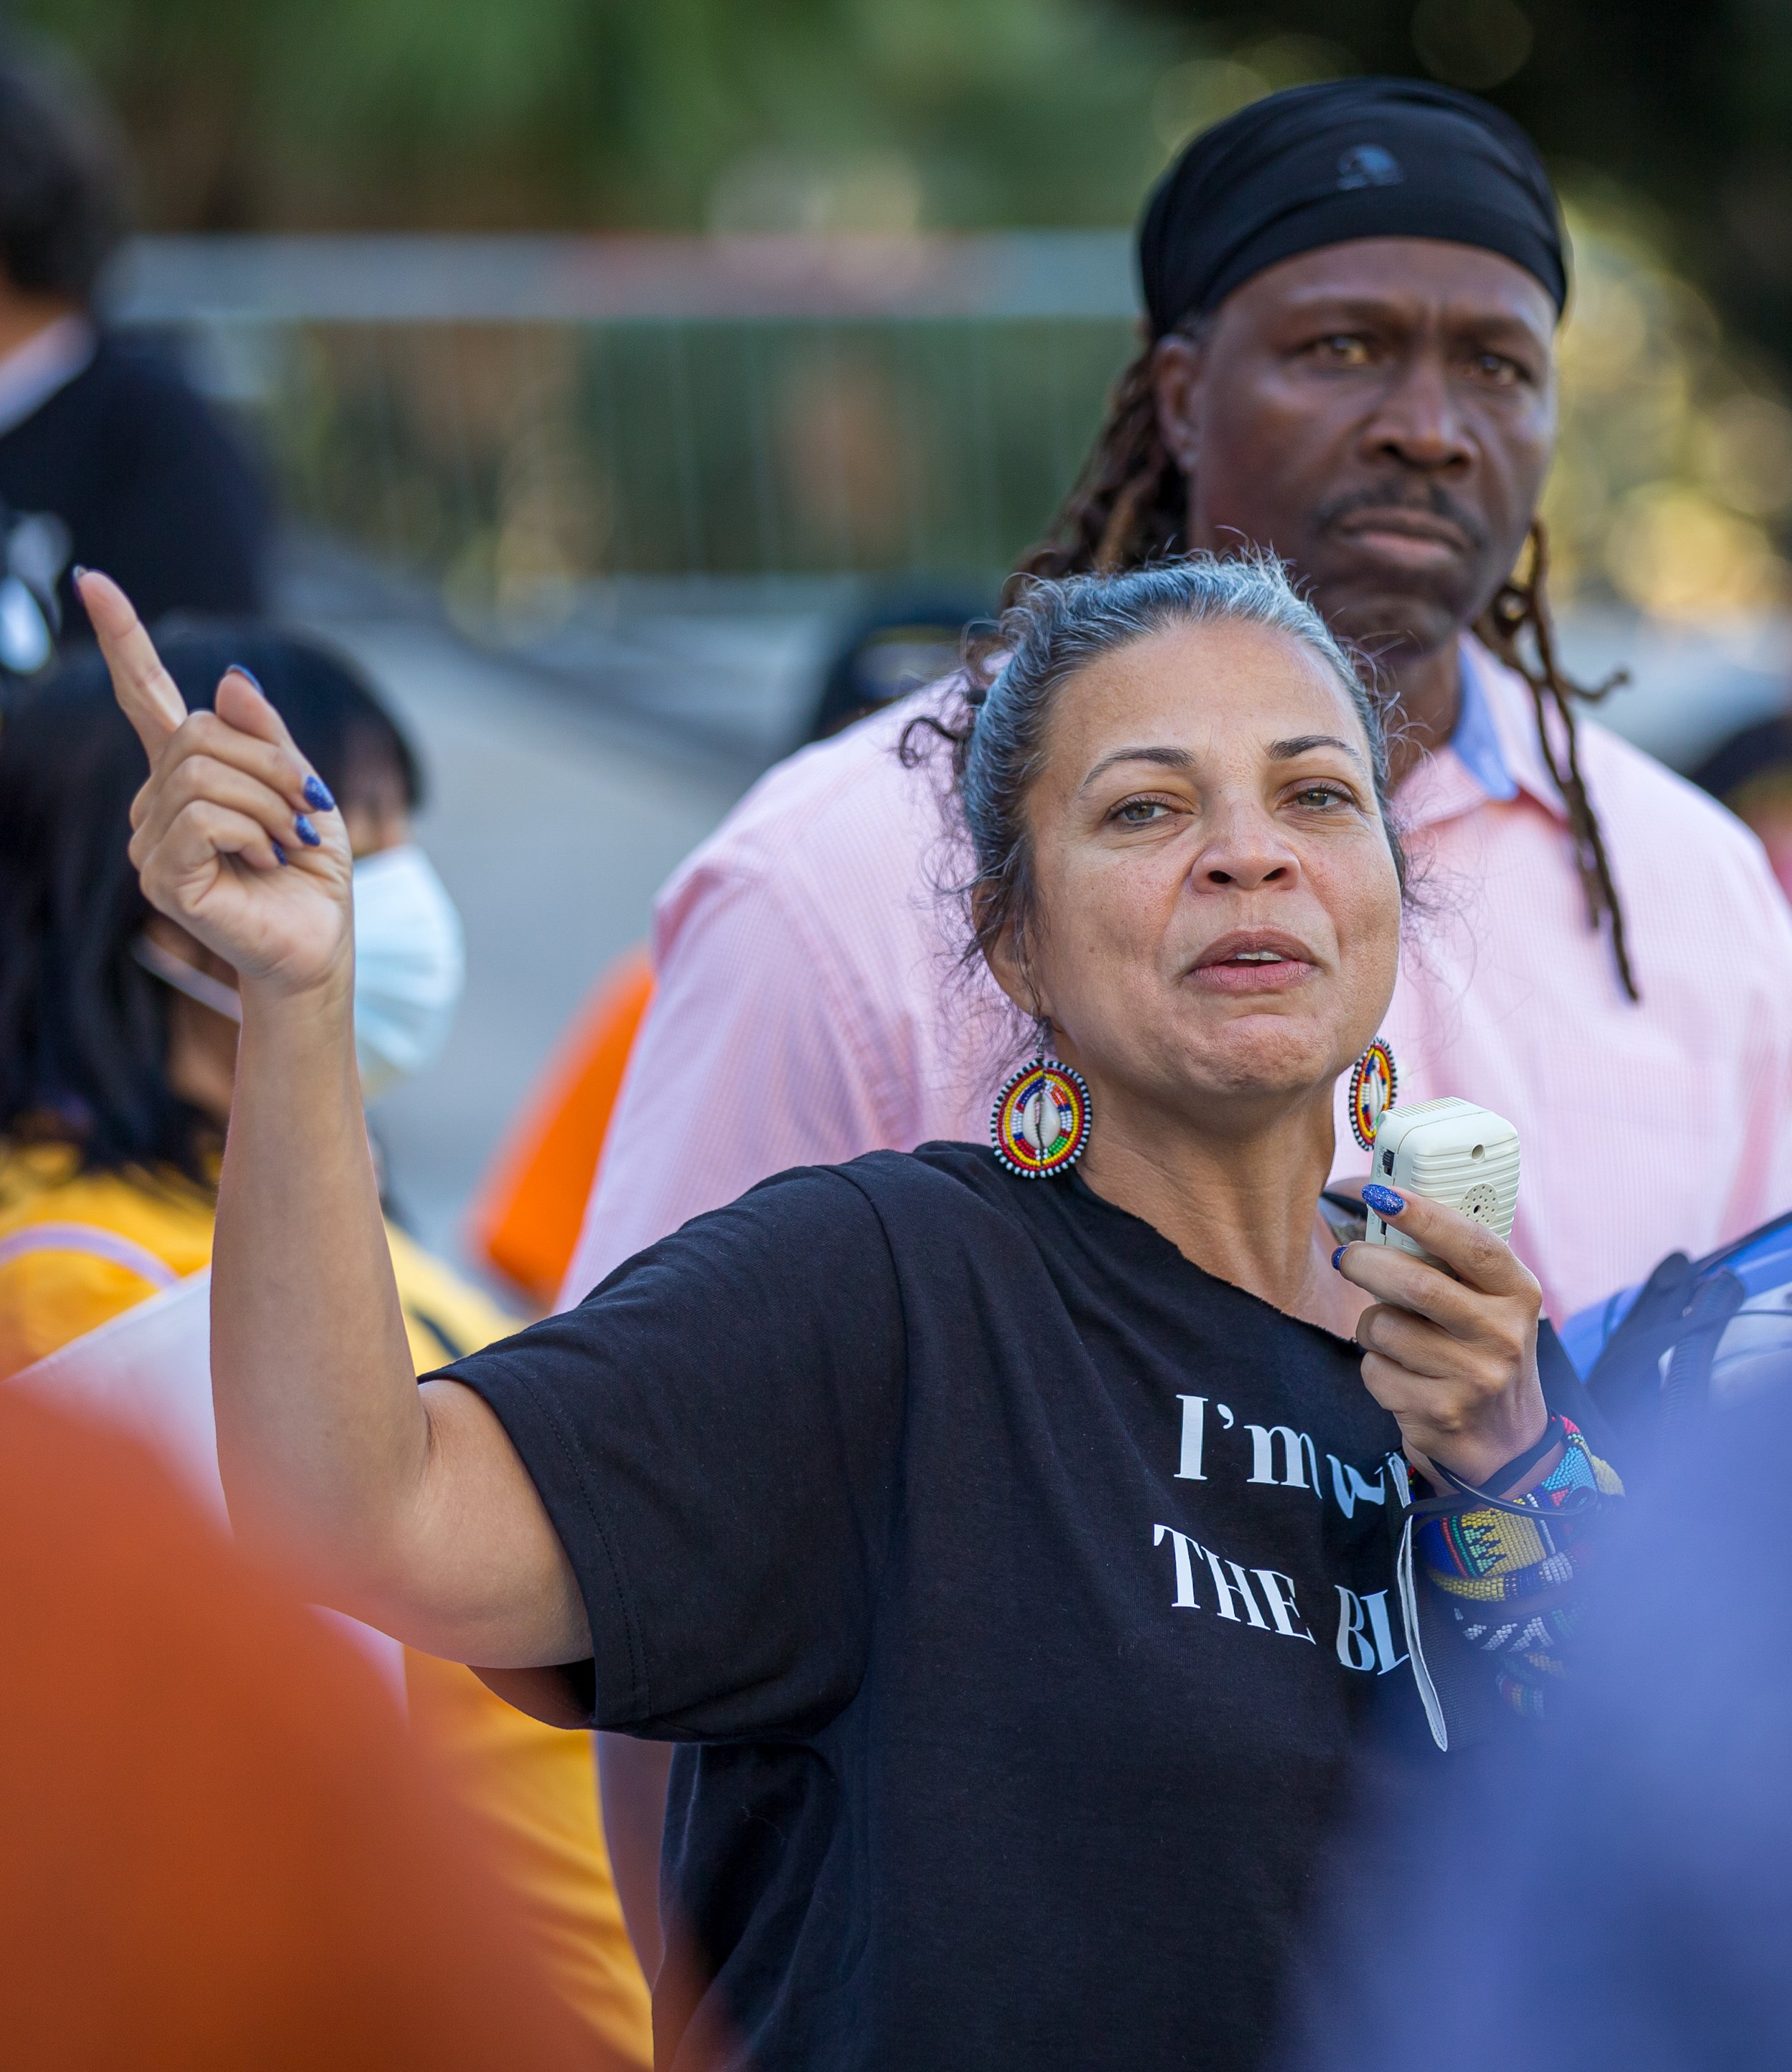  Guest speaker Melina Abdullah, American academic and civic leader, speaking to the protesters who are there calling for the resignation of Kevin De Leon after racist remarks were made in a leaked audio on Tuesday, Oct. 18 at Los Angeles, Calif. (Dan